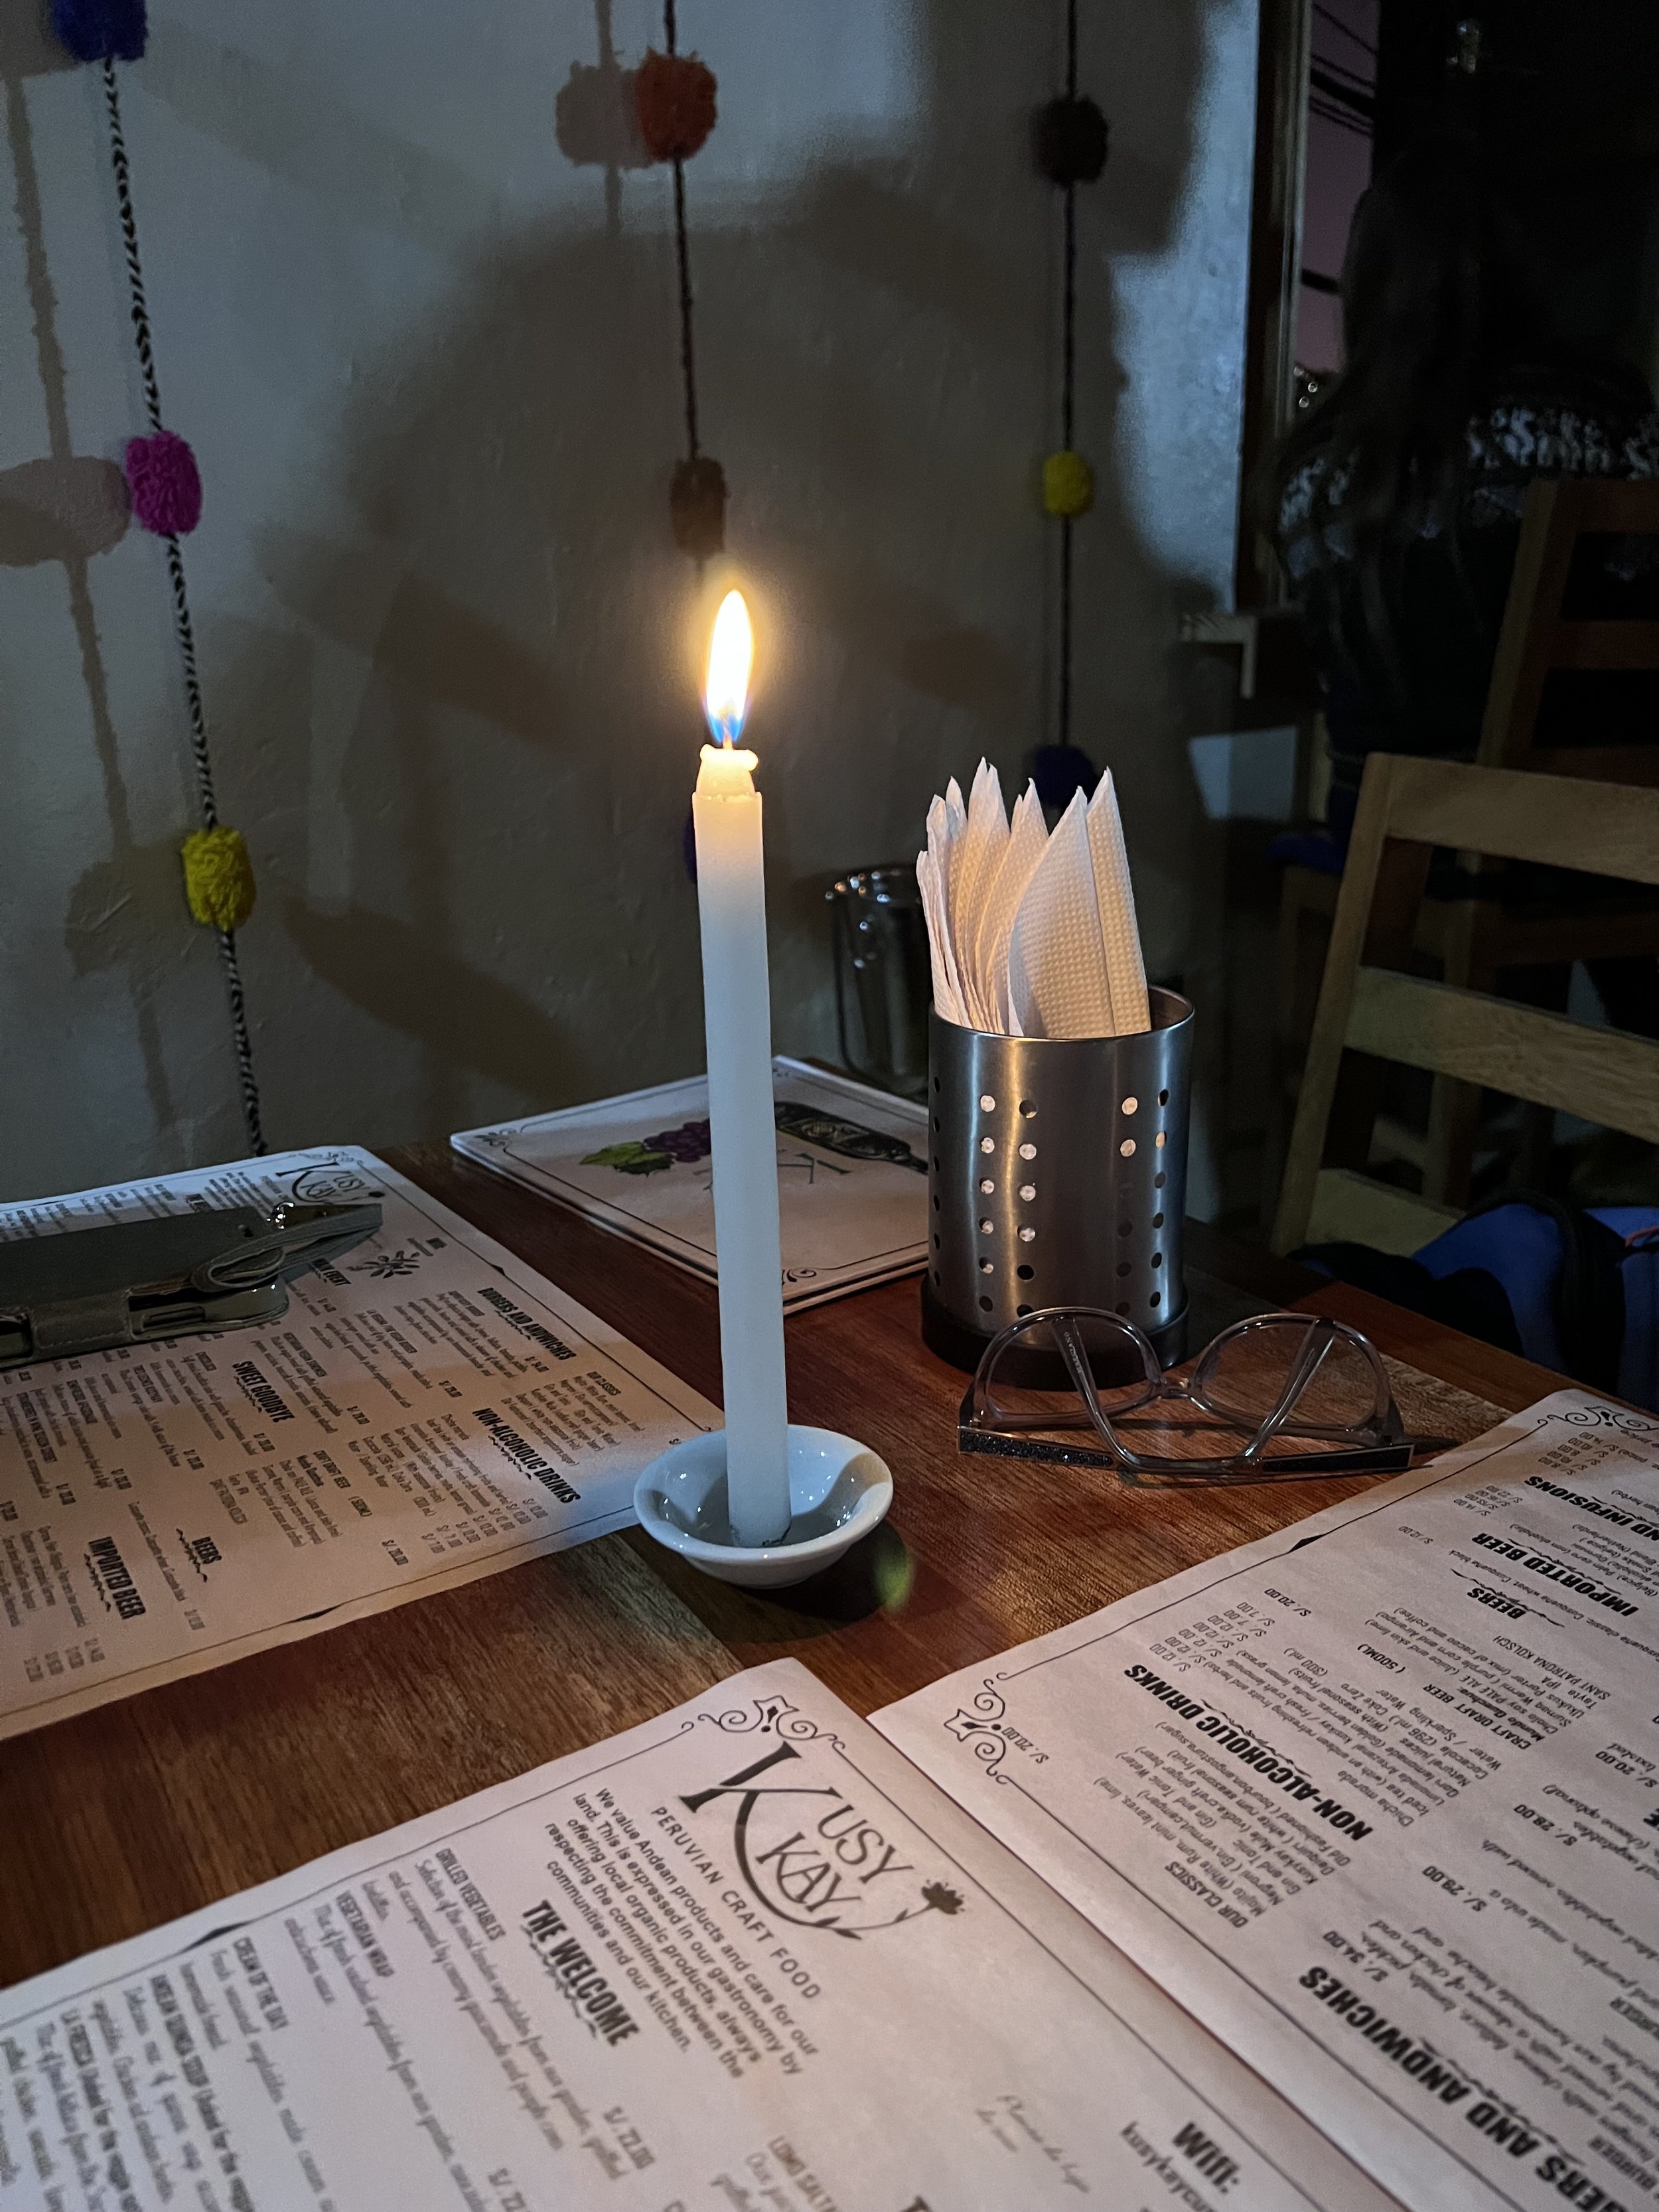 Candle-lit dinner